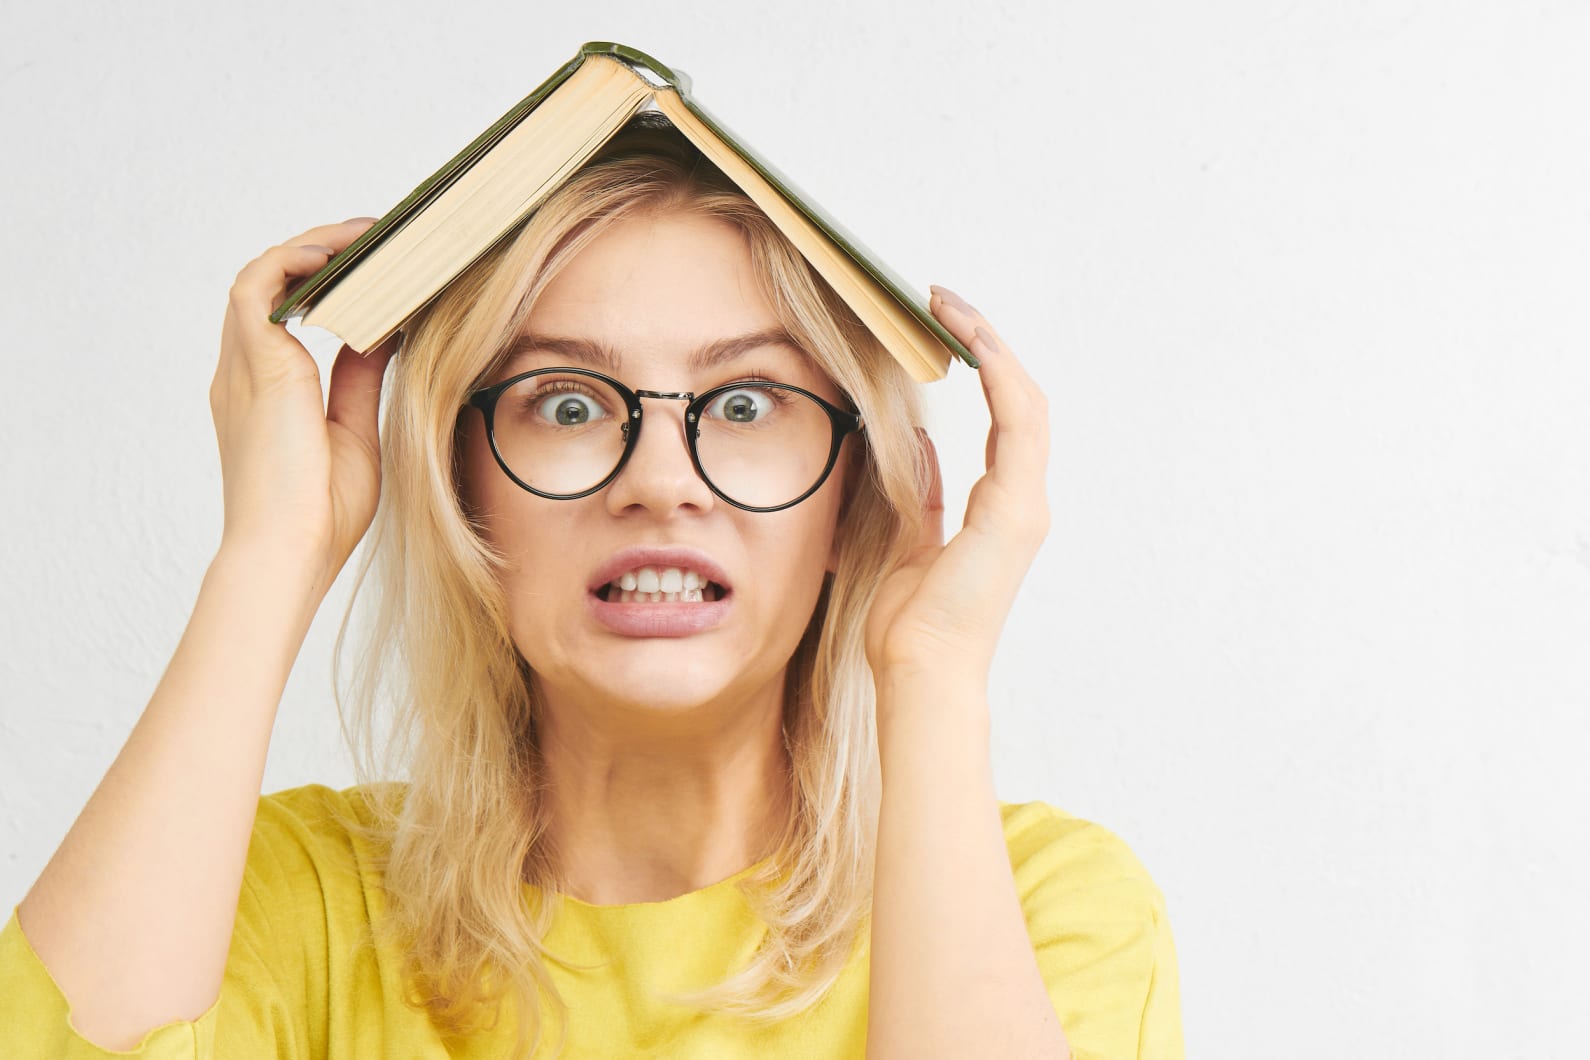 Frustrated student holding open book over head